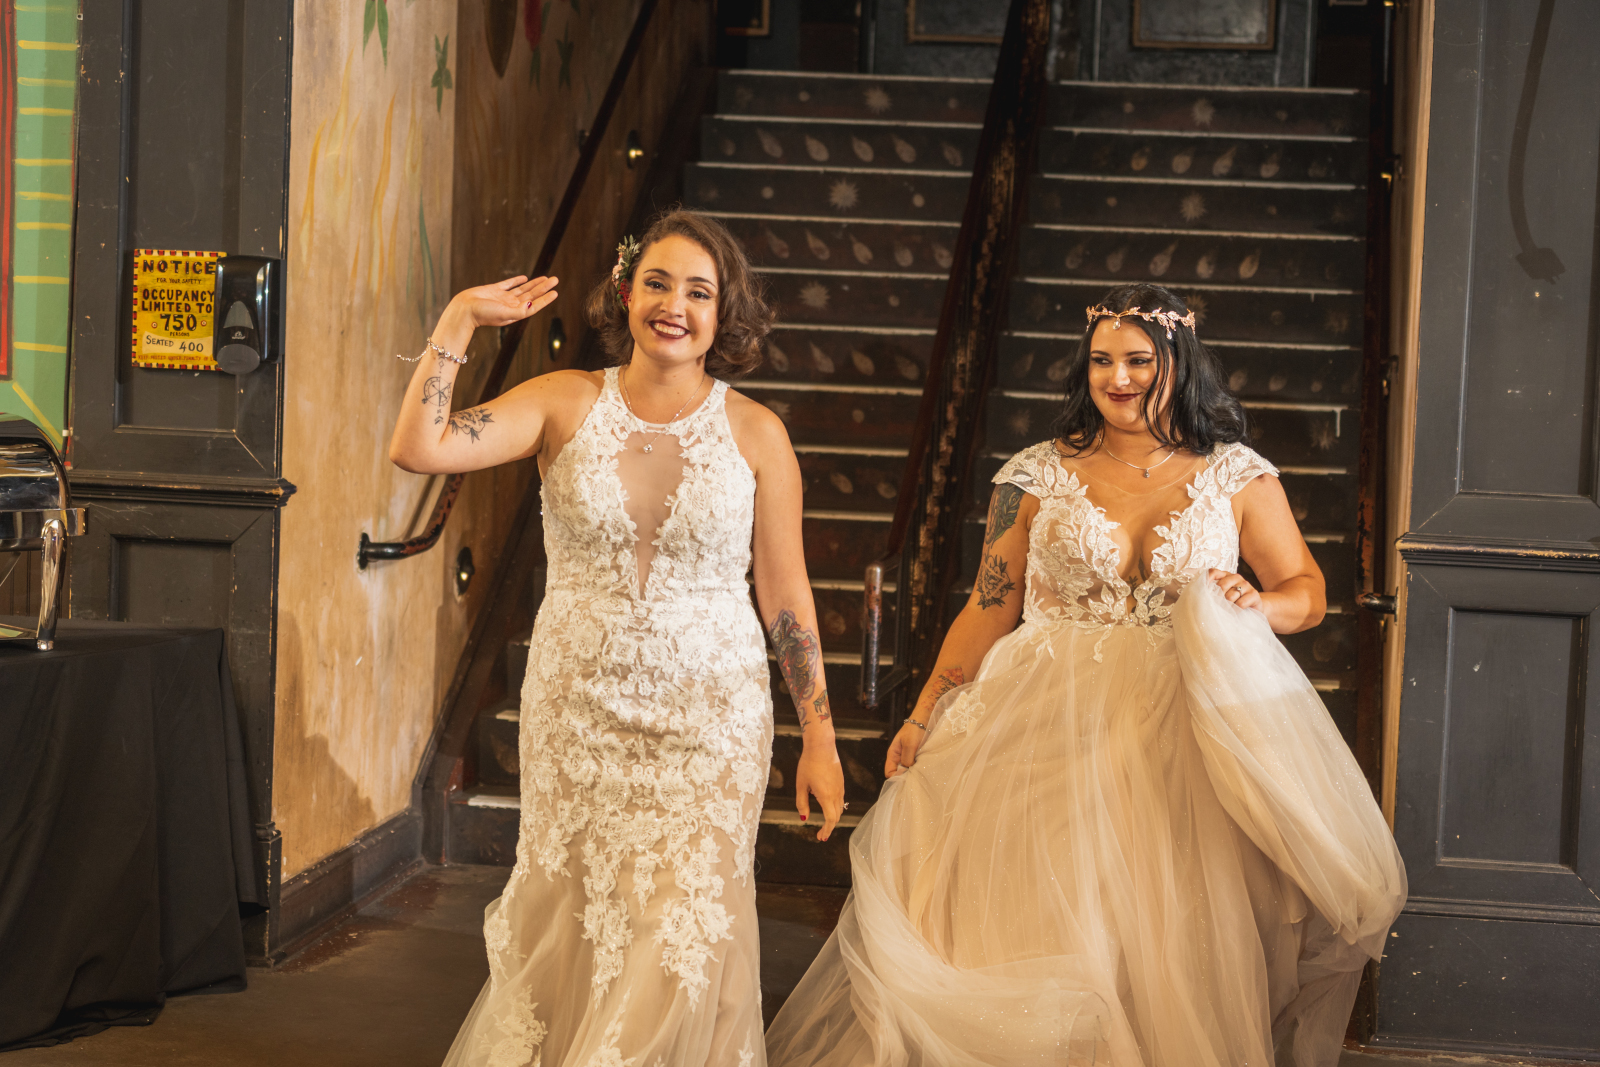 Two brides bridal party entrance, wave, smile, two wedding dresses, love is love, beautiful lesbian wedding reception at House of Blues Cleveland